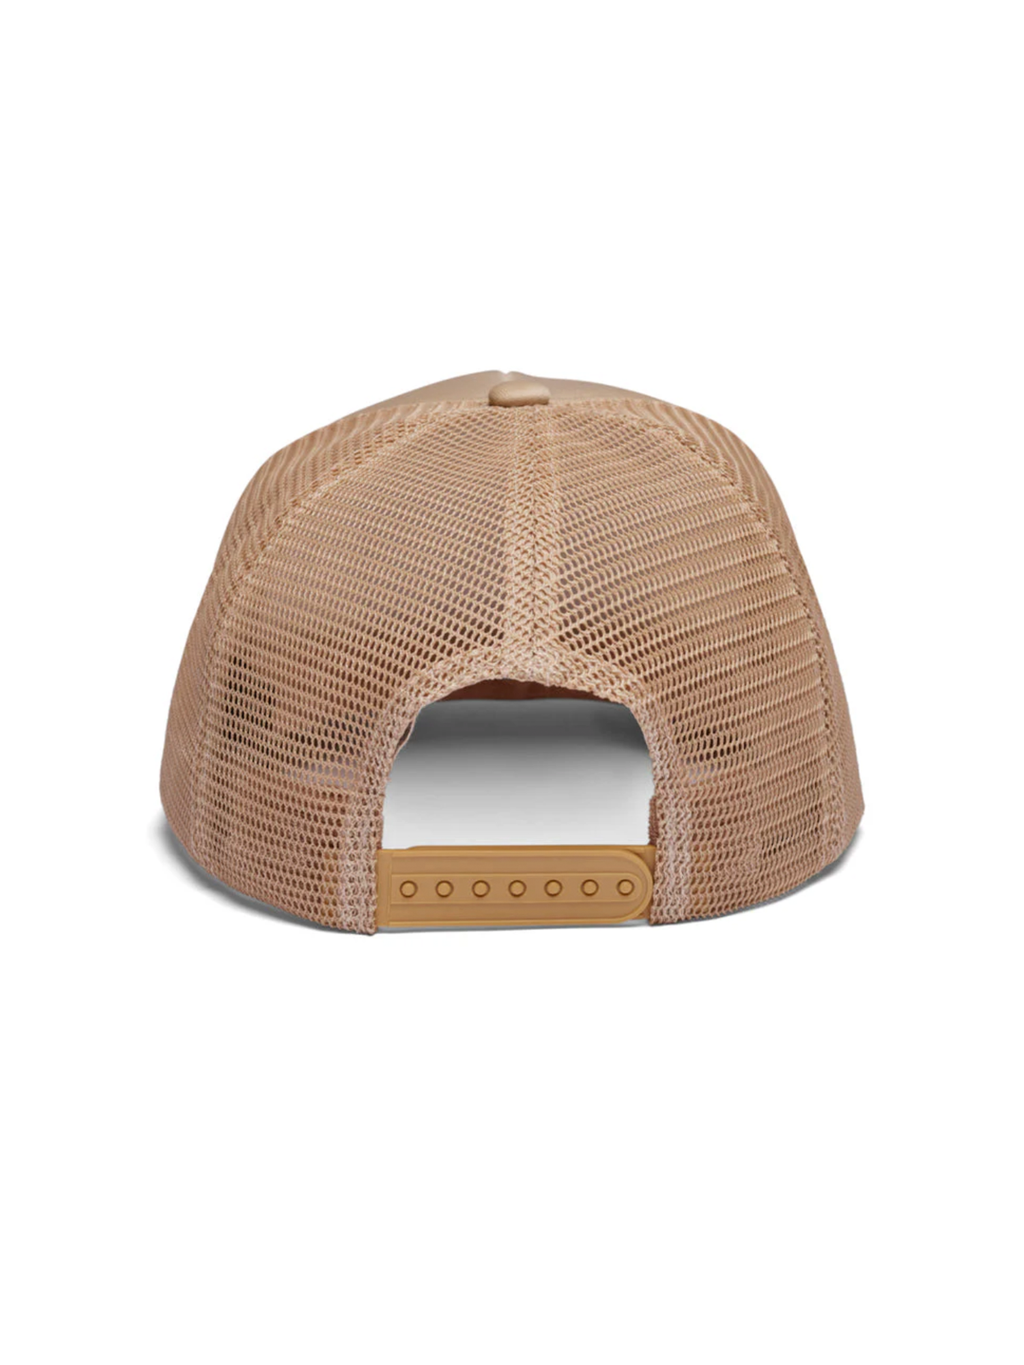 Take It Easy Trucker Hat in Tan - Stitch And Feather